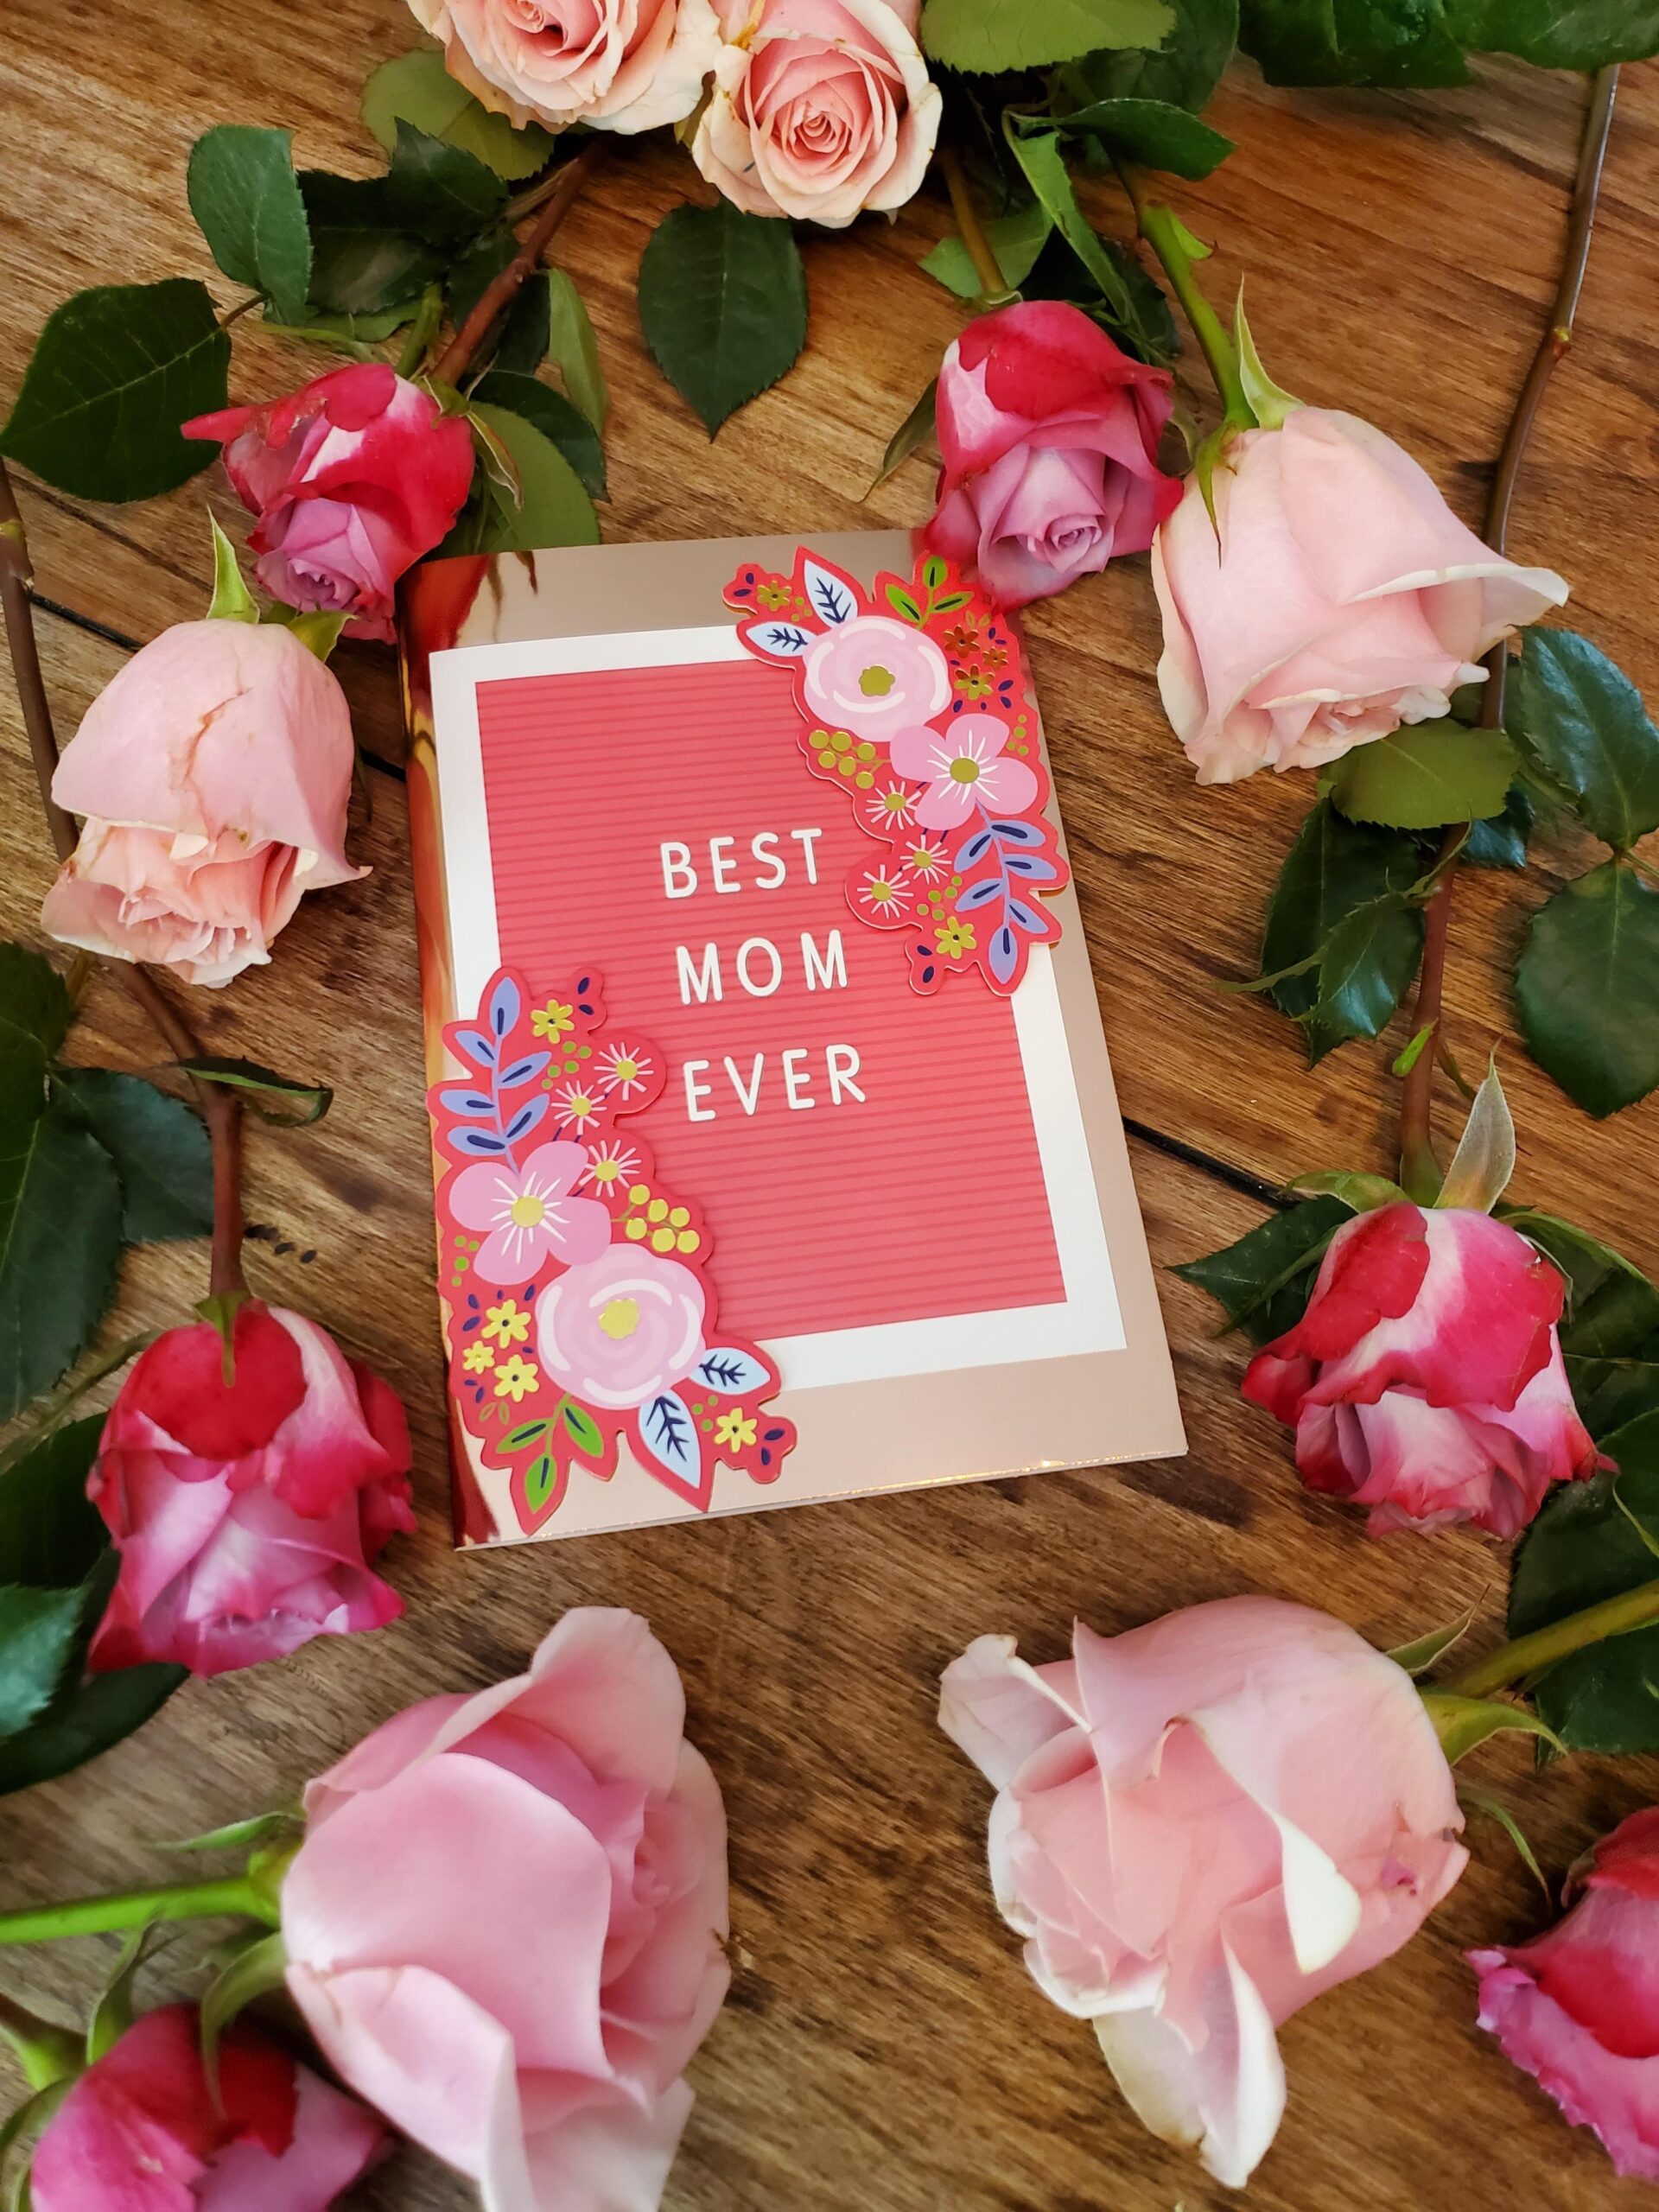 An image of a Mother's Day card surrounded by roses that says, Best Mom Ever.